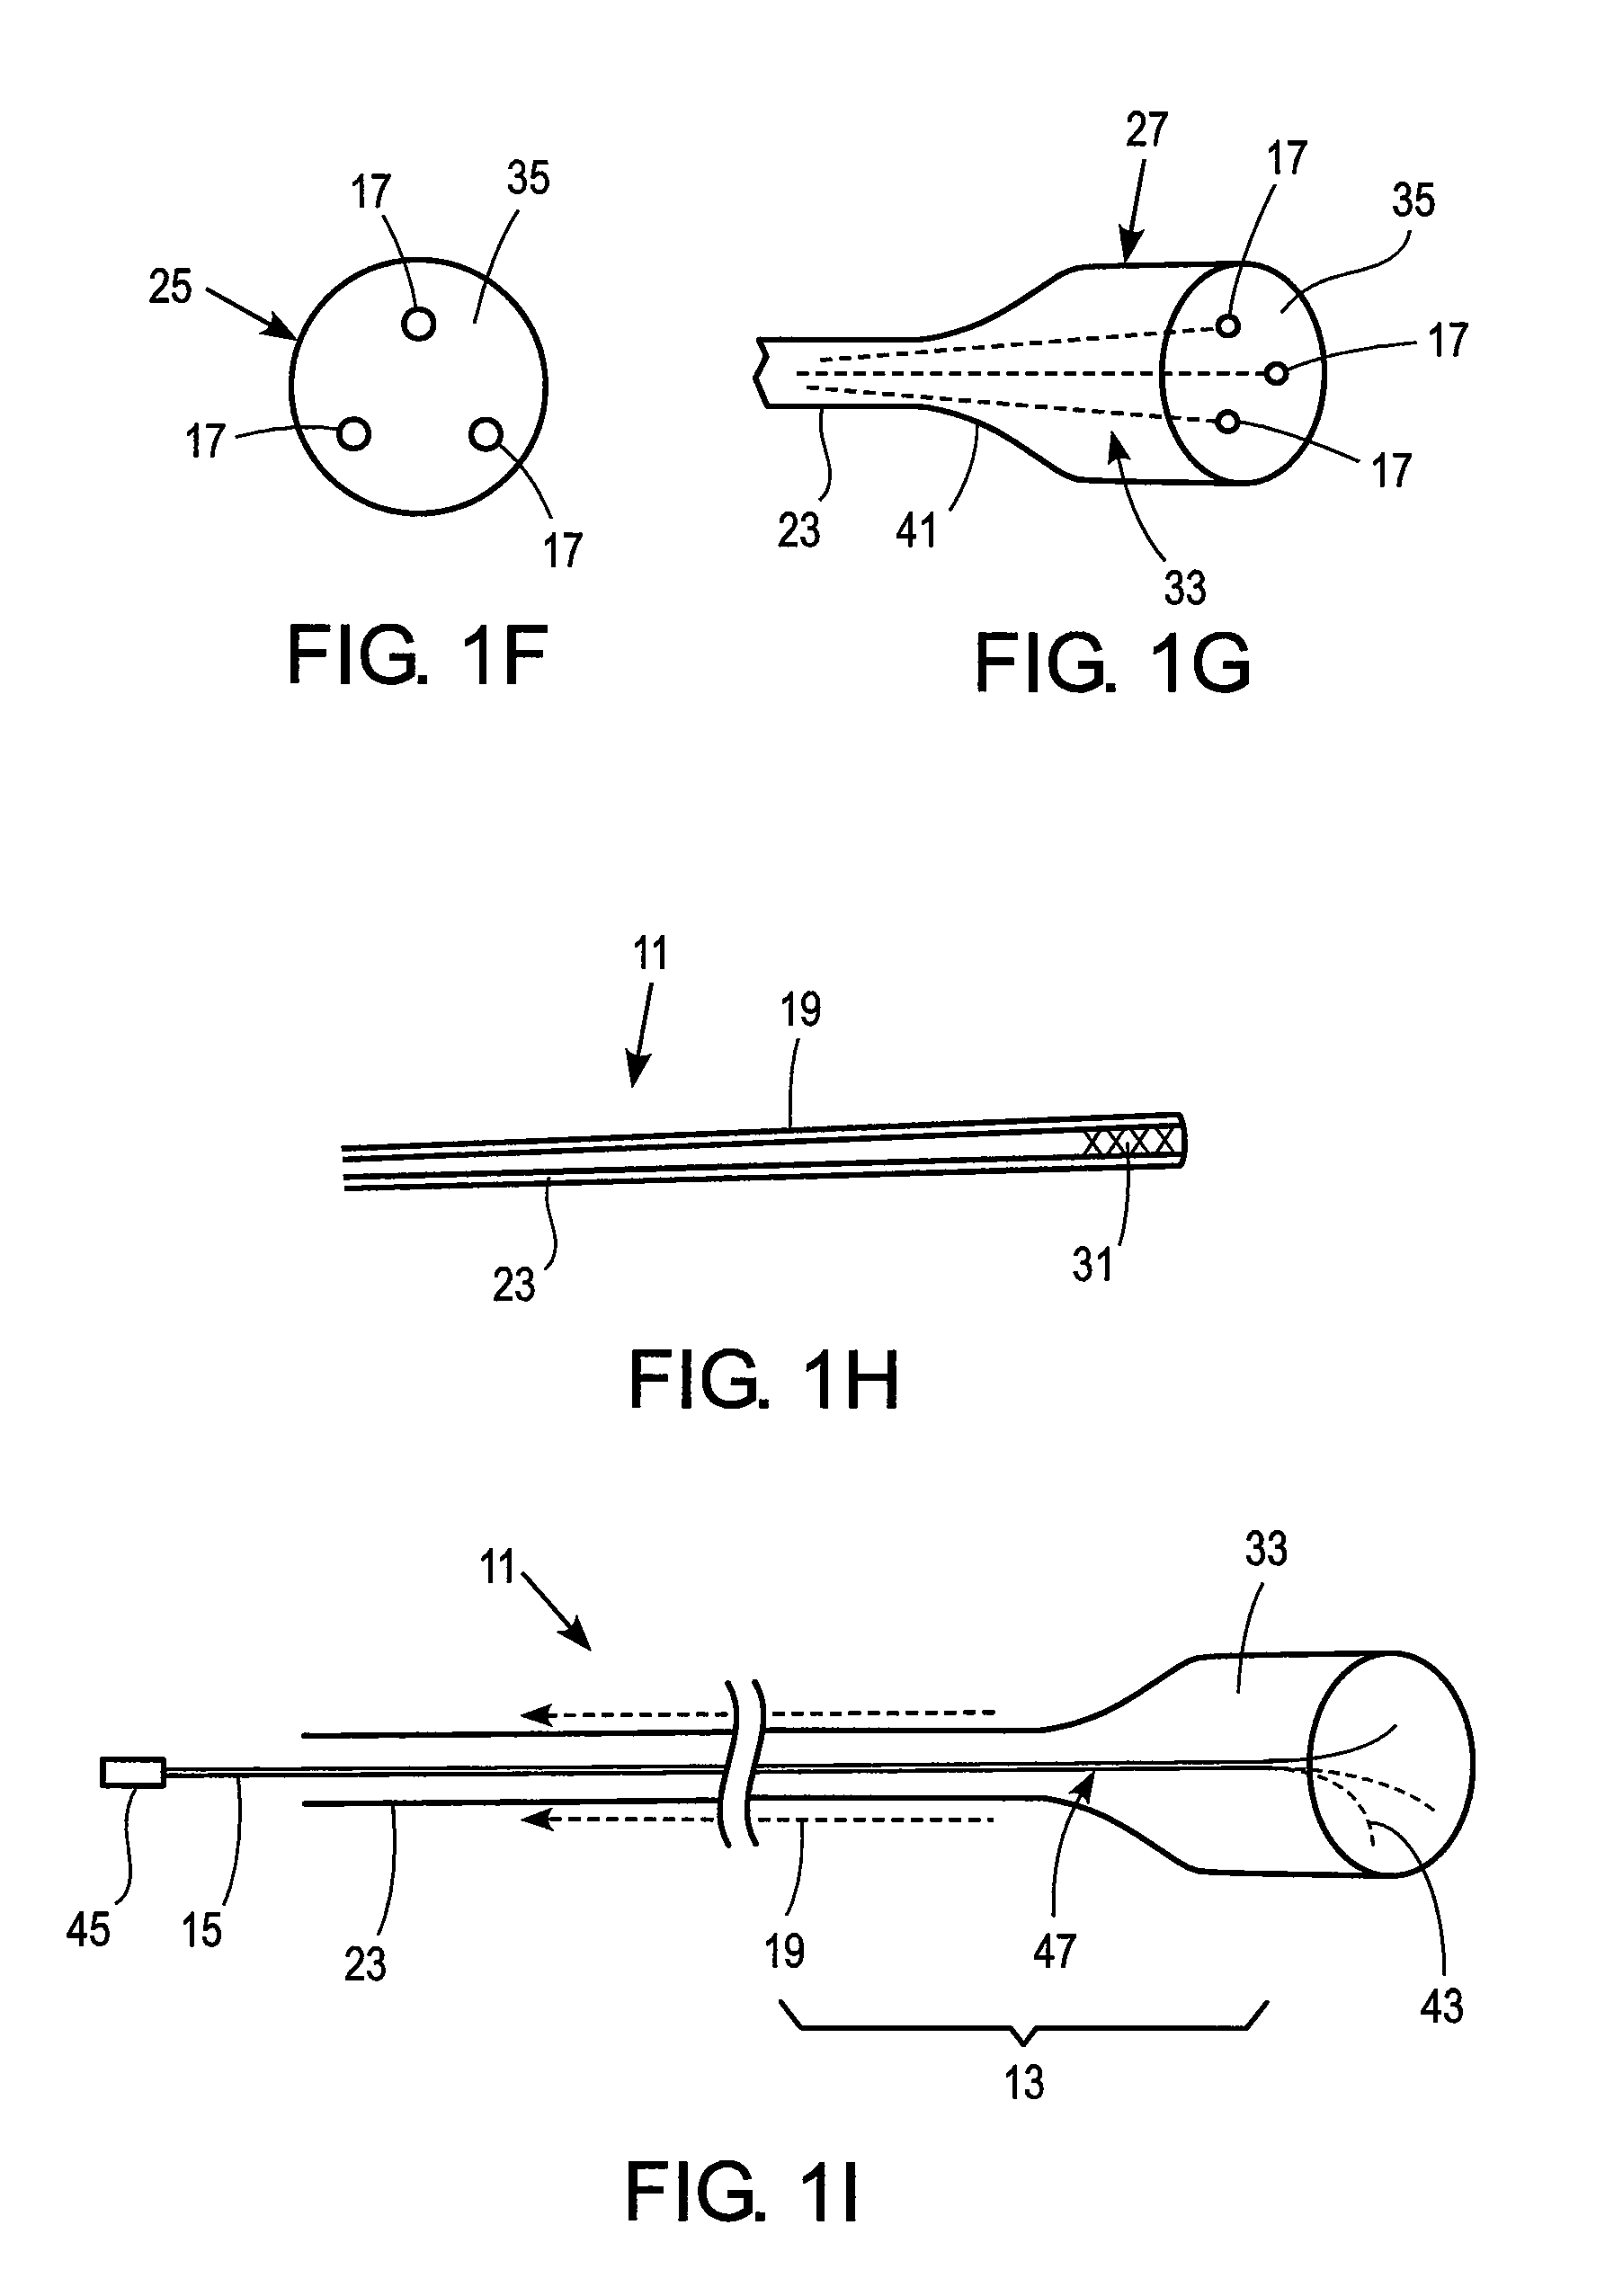 Catheter apparatus and methods for treating vasculatures